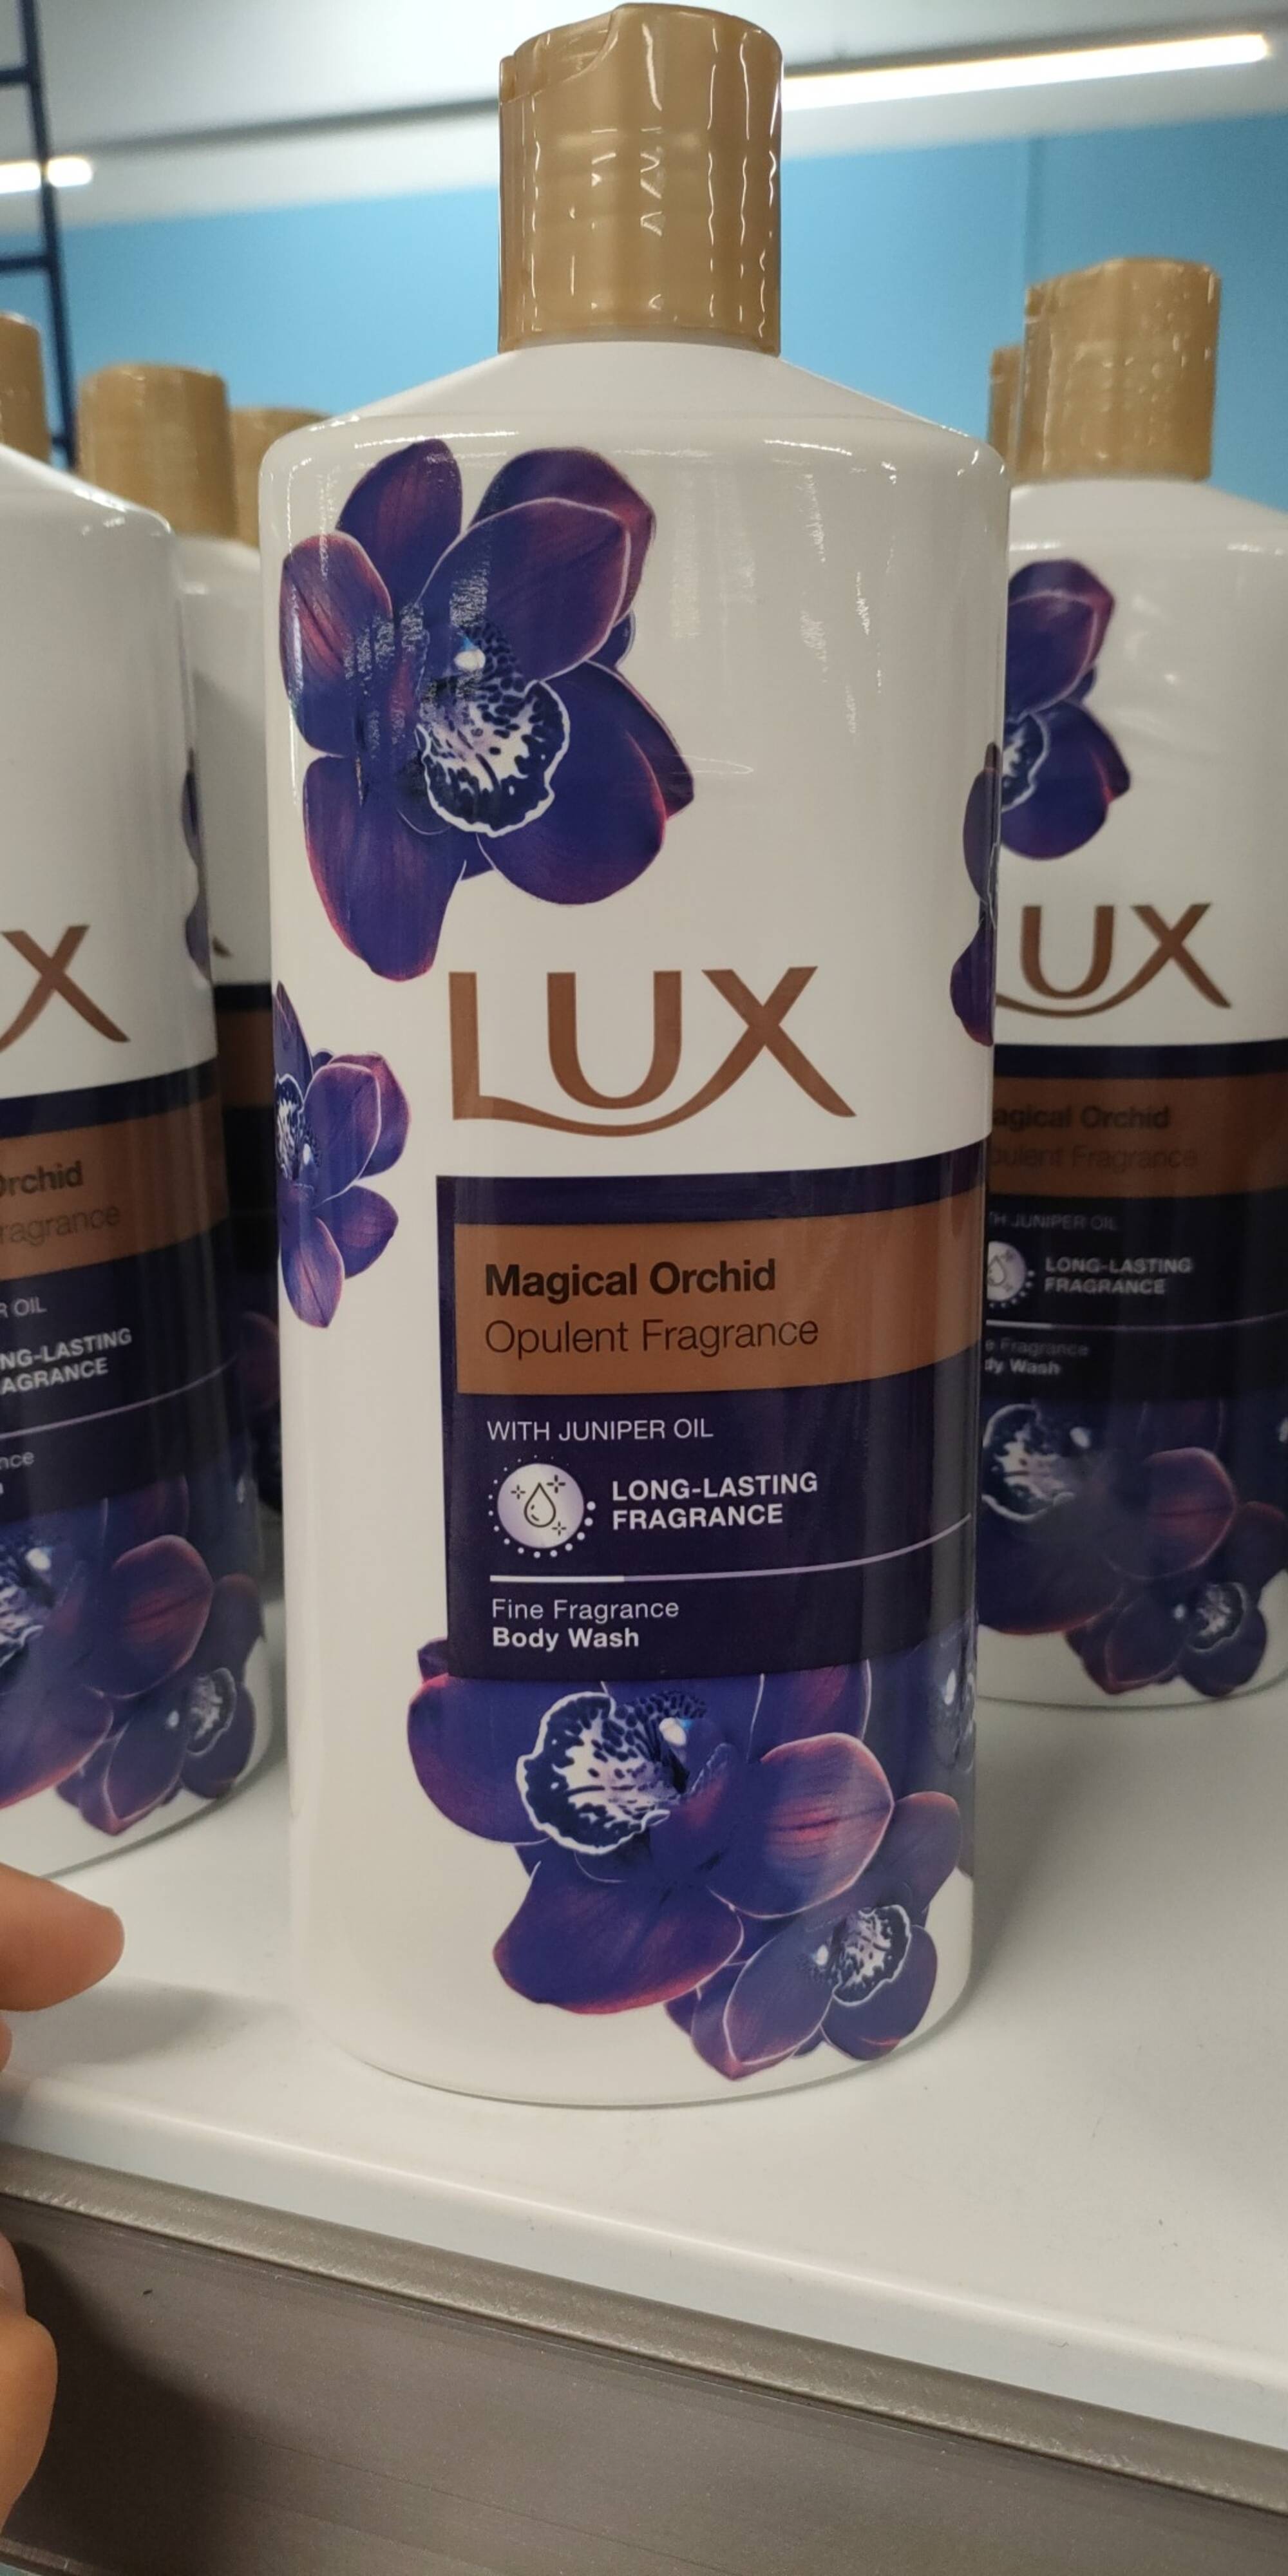 LUX - Magical orchid - Body wash